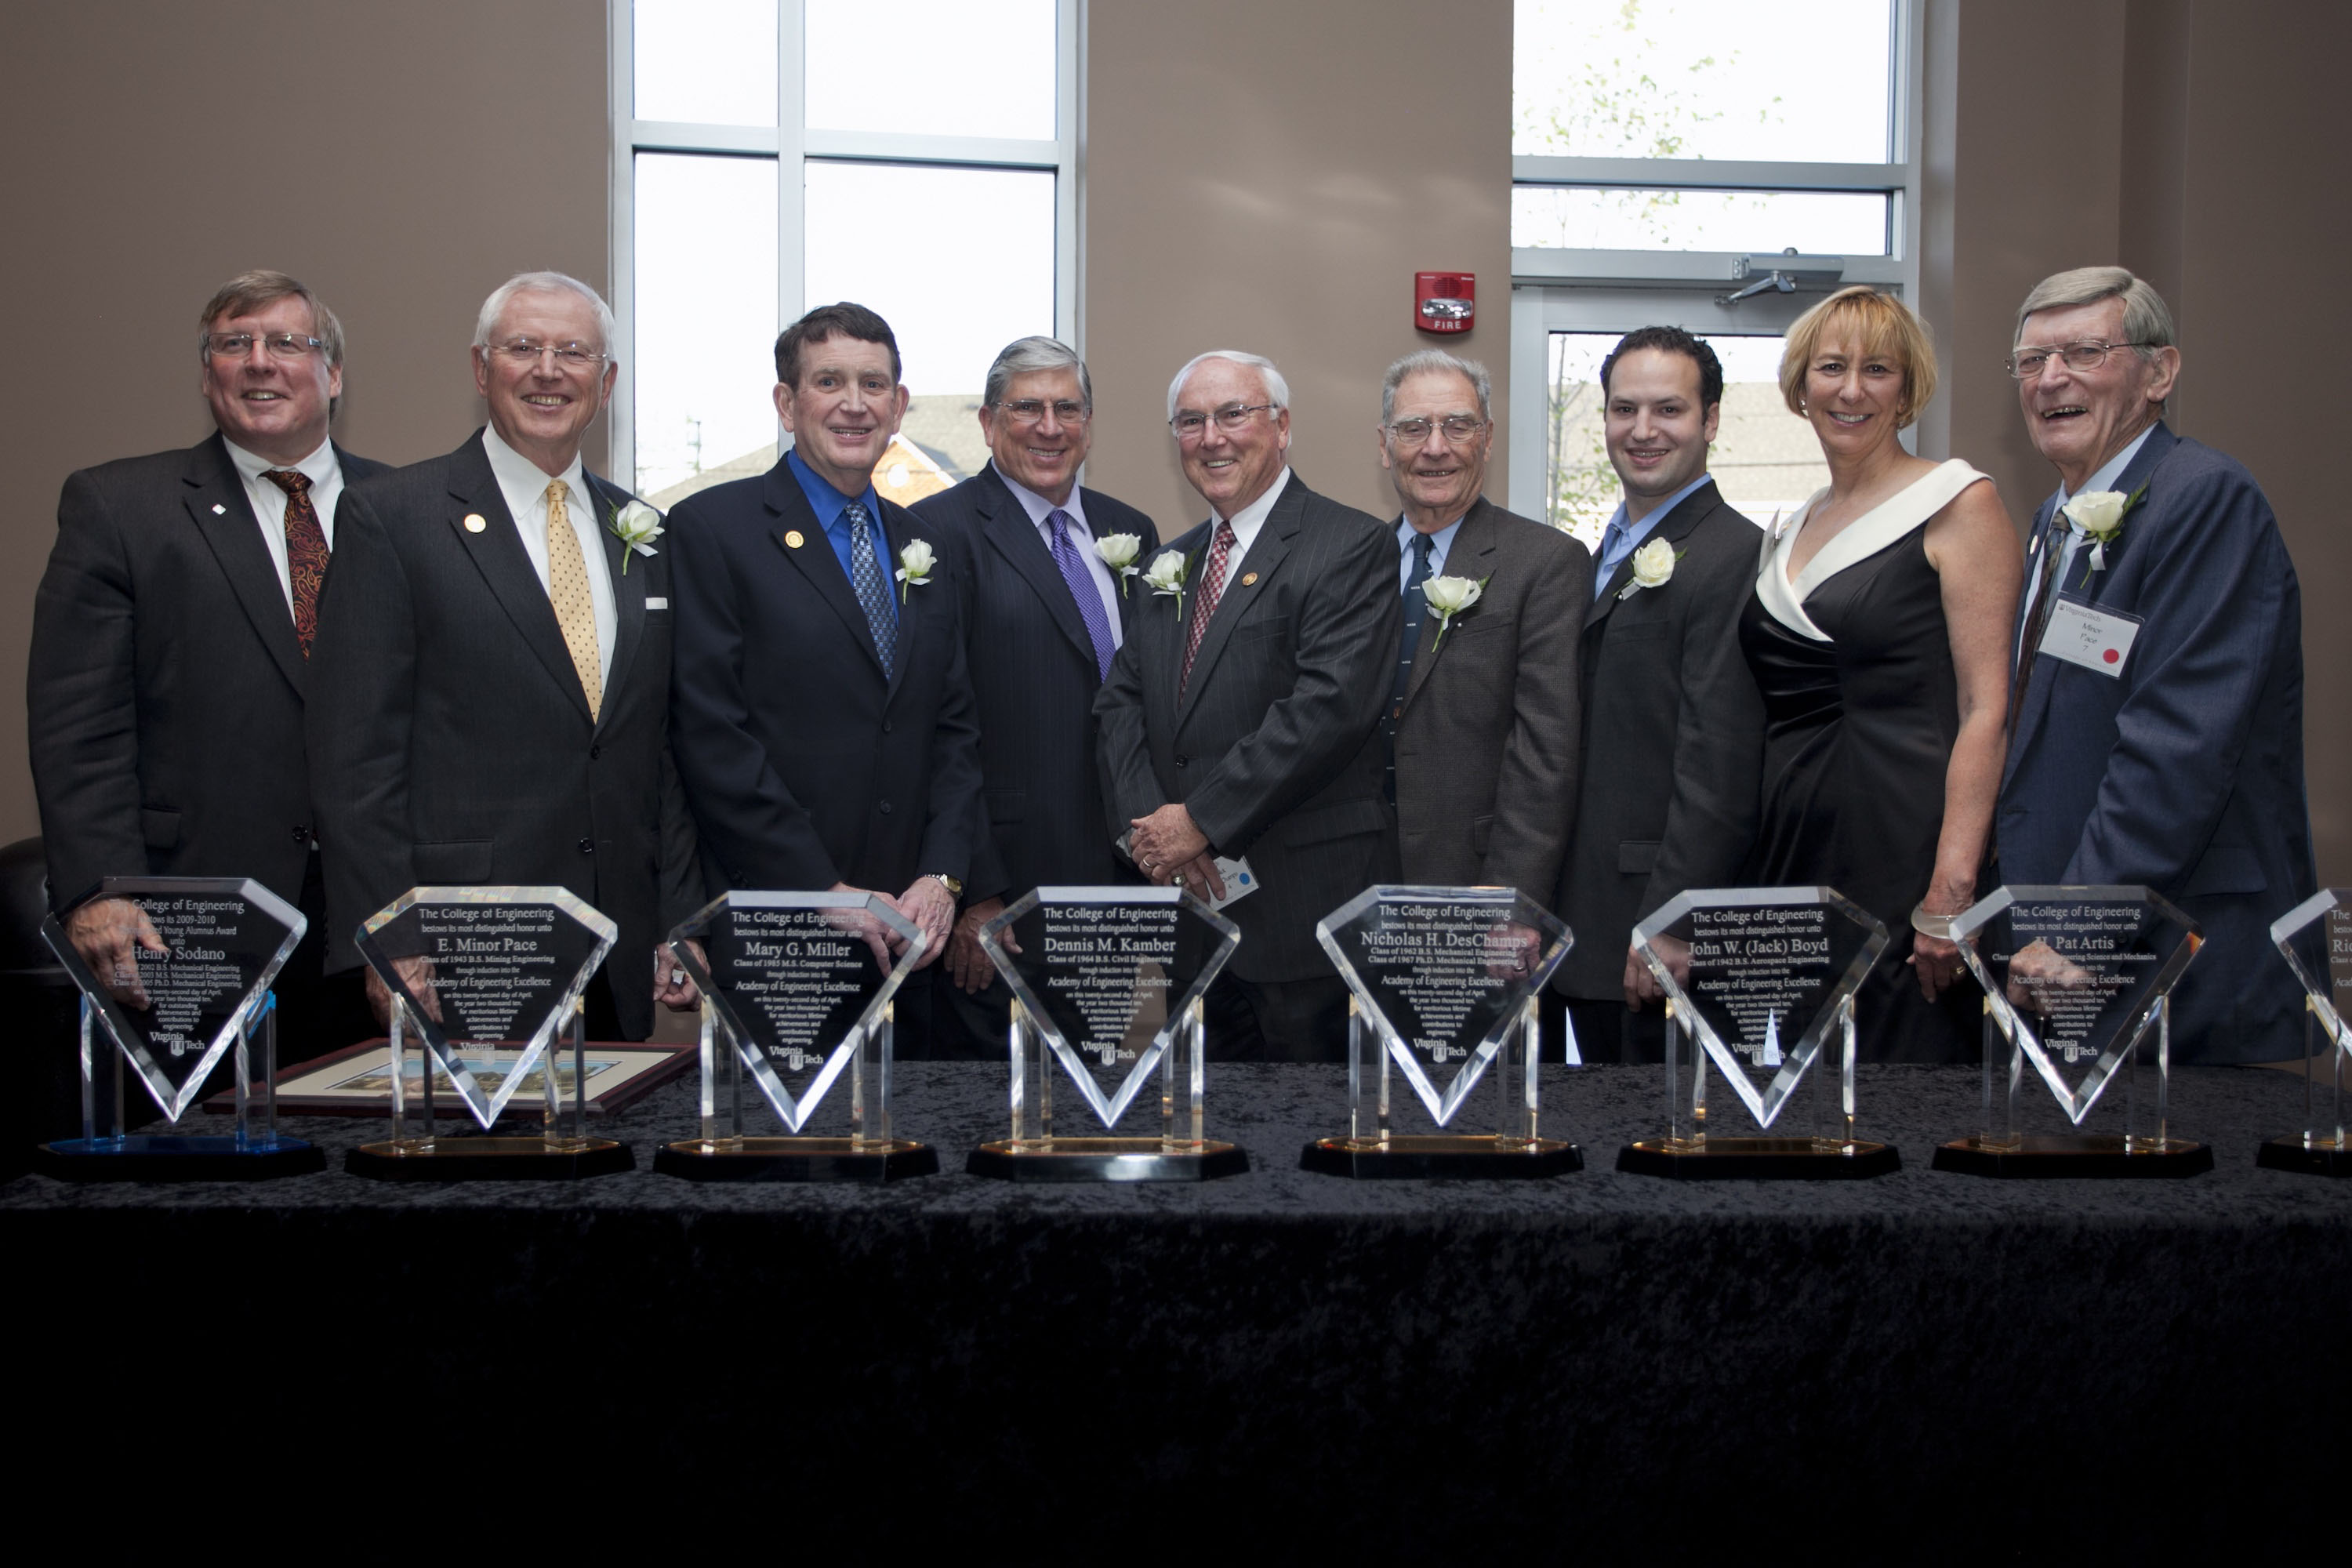 Pictured are the new members of the Academy of Engineering Excellence at Virginia Tech. From left to right, are:  Richard Benson, dean of Virginia Tech's College of Engineering, who presented the awards; Richard Arnold of Blacksburg, Va.; H. Pat Artis of Pogosa Springs, Colo.; Dennis M. Kamber of Poolesville, Md.; Nicholas DesChamps of Fincastle, Va., and Las Vegas, Nev.; John W. Boyd of Saratoga, Cal.; Henry Sodano (named the 2010 Outstanding Young Alumnus at the same event and not a member of the 